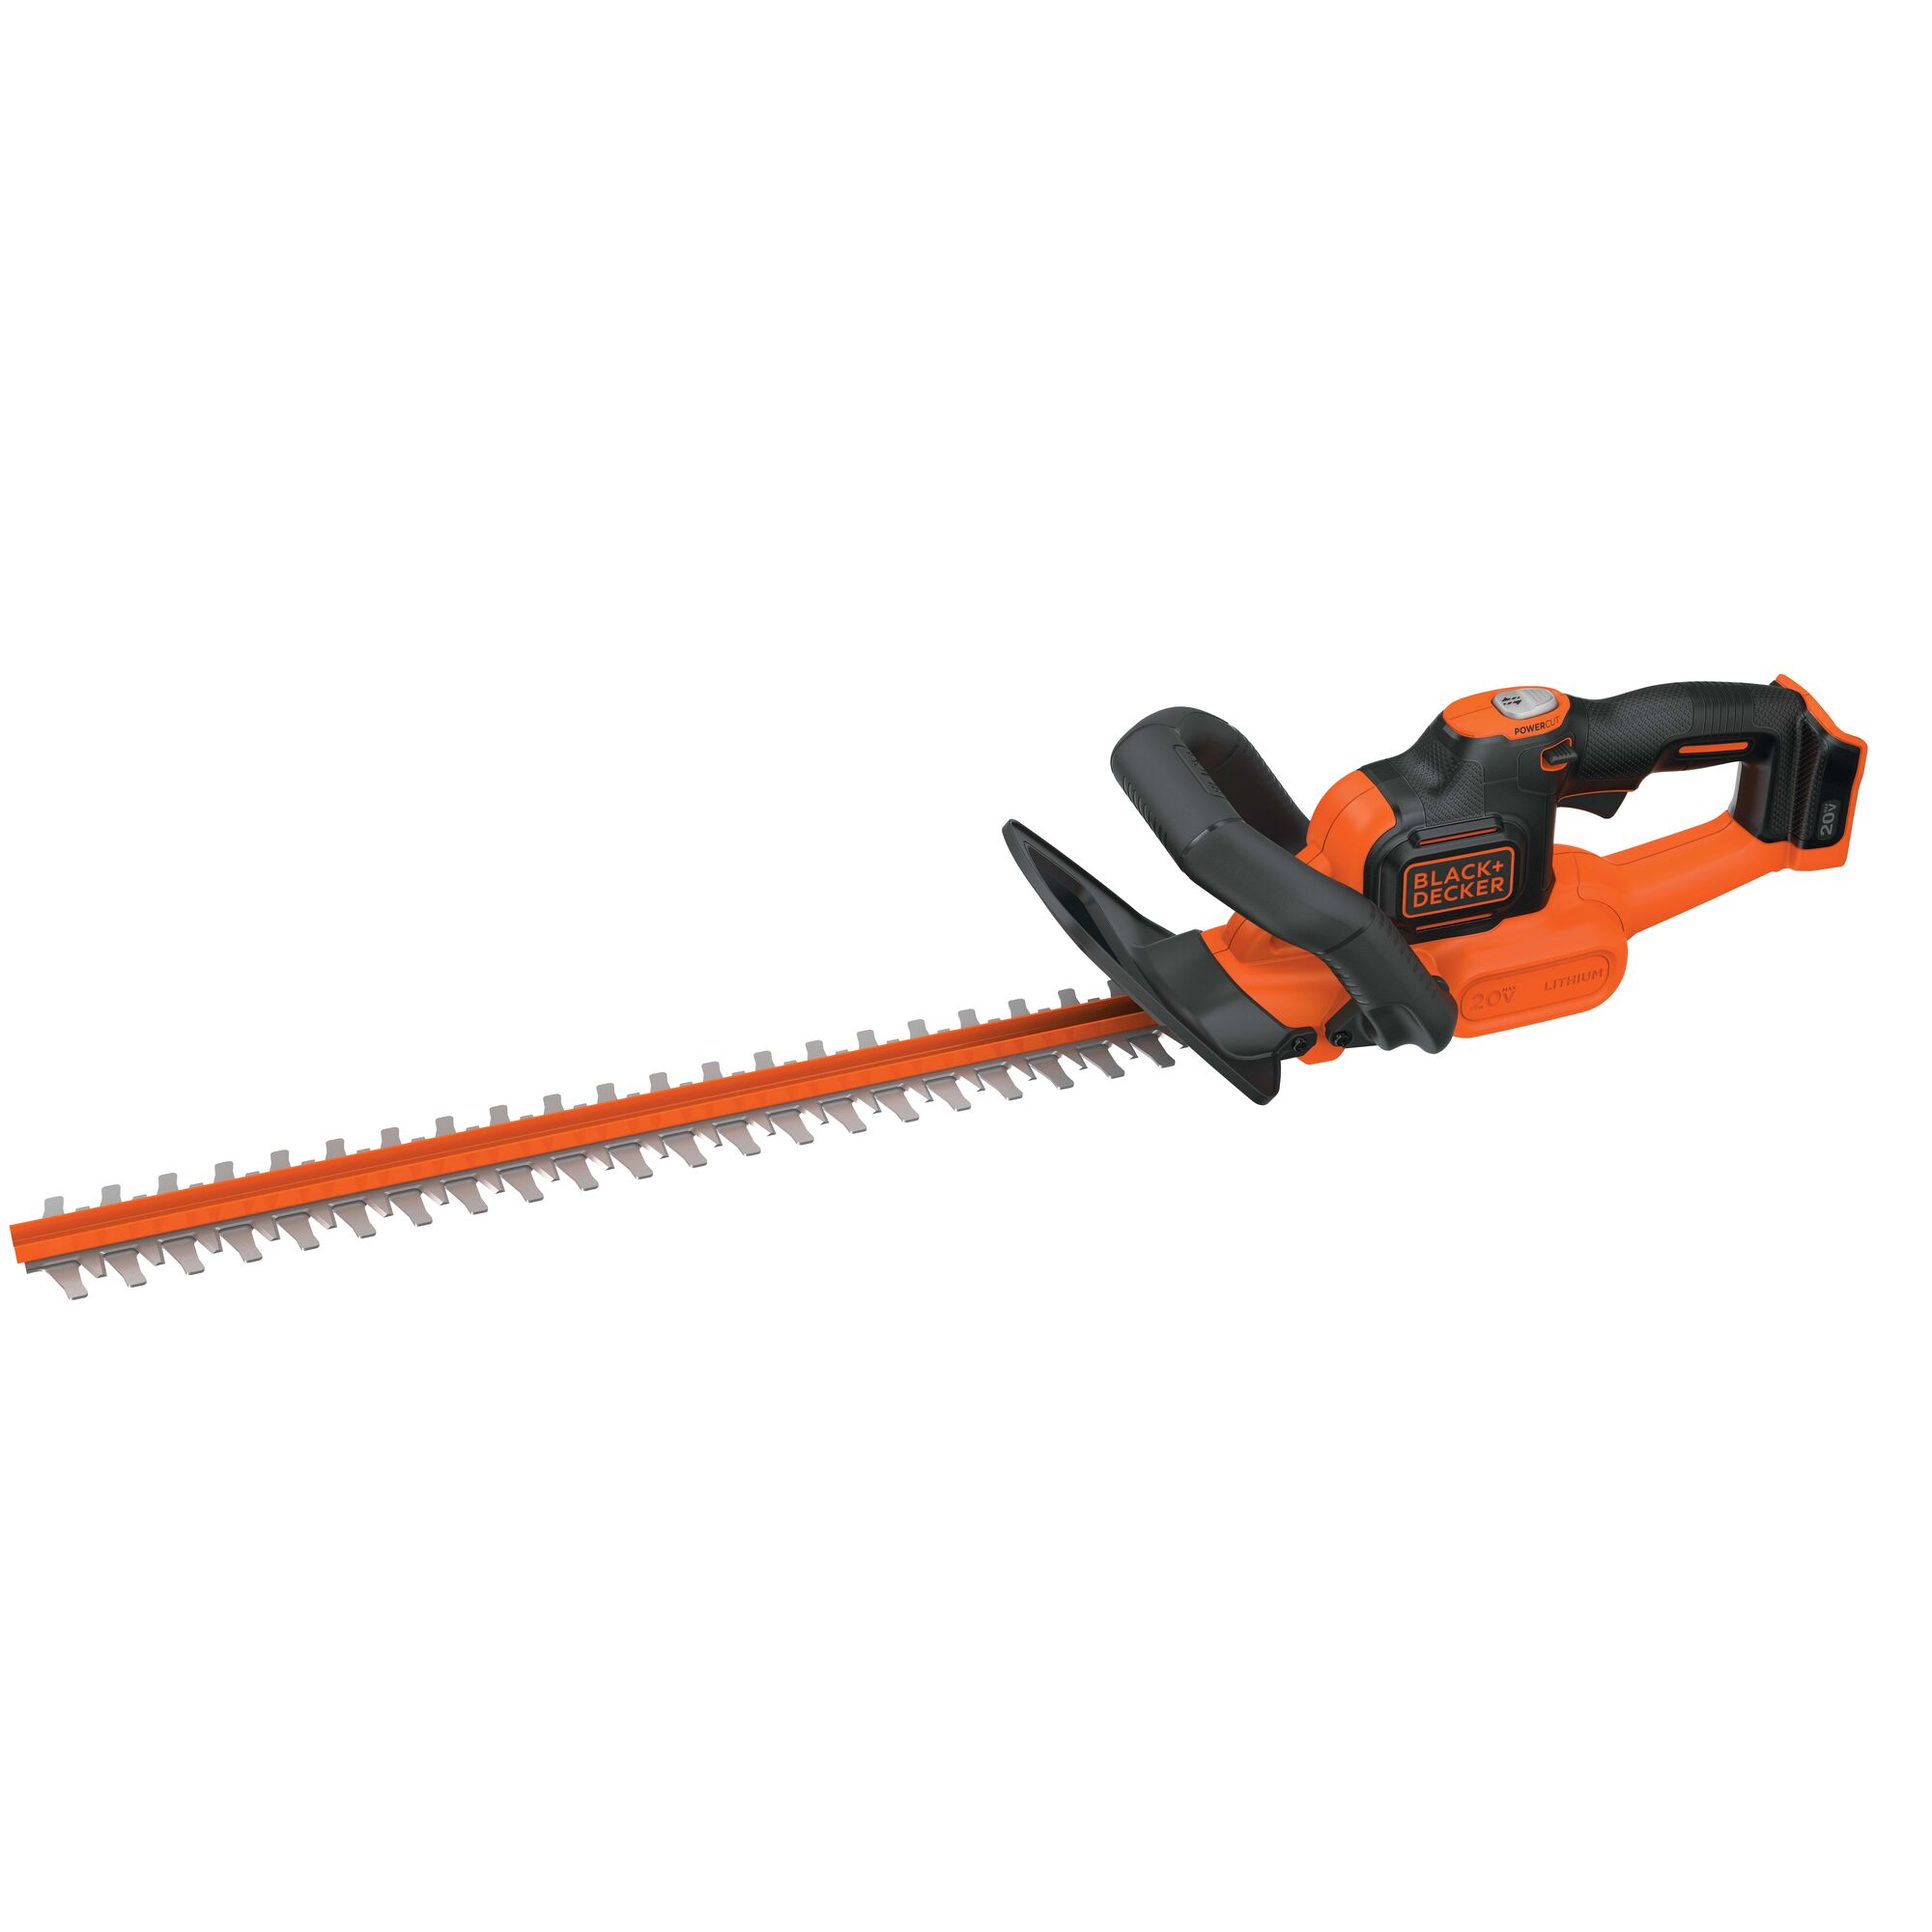 20 Volt Max Powercut Hedge Trimmer on white background.